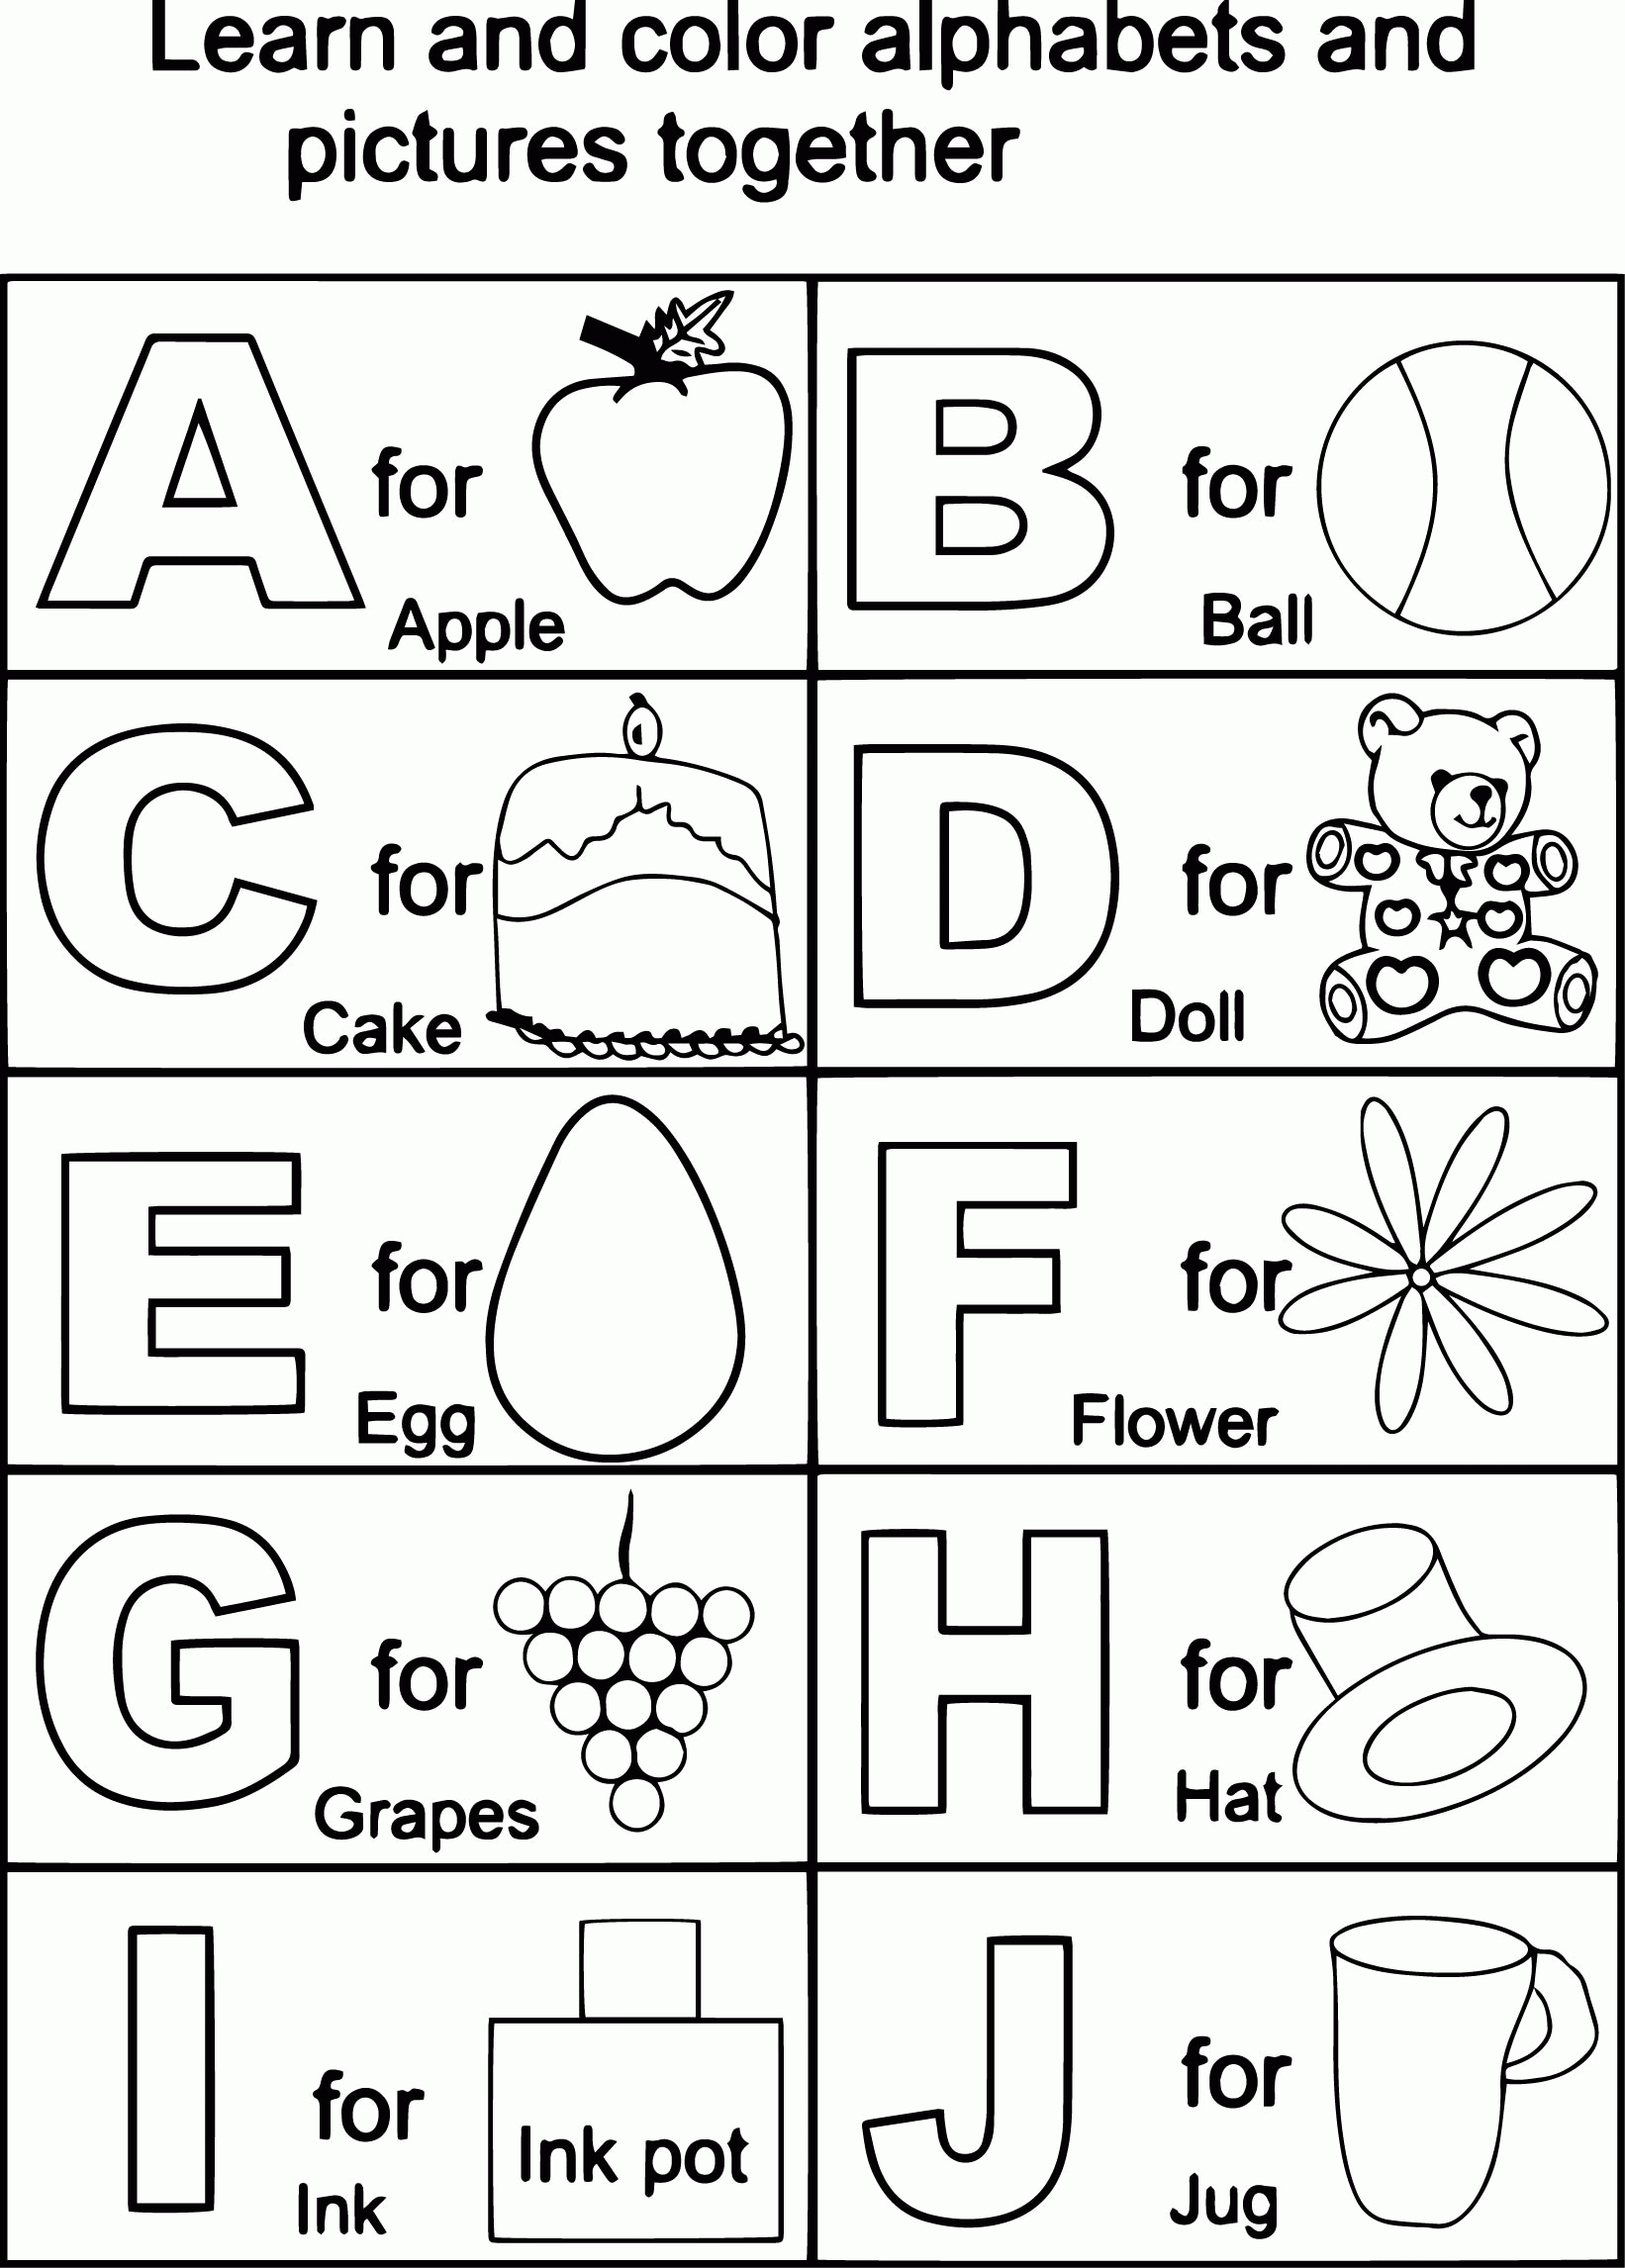 Free Printable Alphabet Coloring Pages For Kids   Coloring Page ...